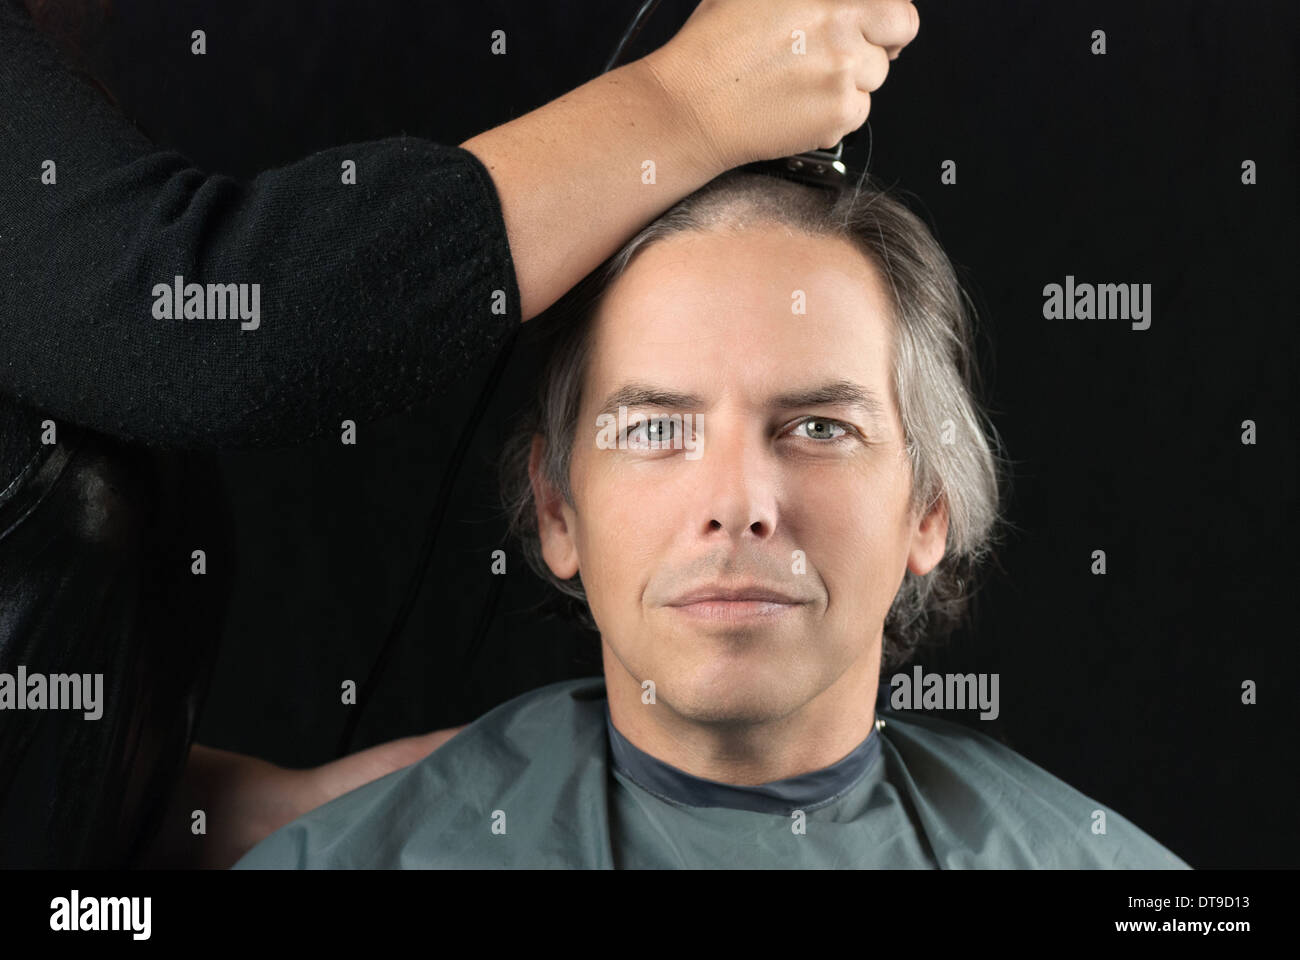 Man Getting Long Hair Shaved Off For Cancer Fundraiser Stock Photo